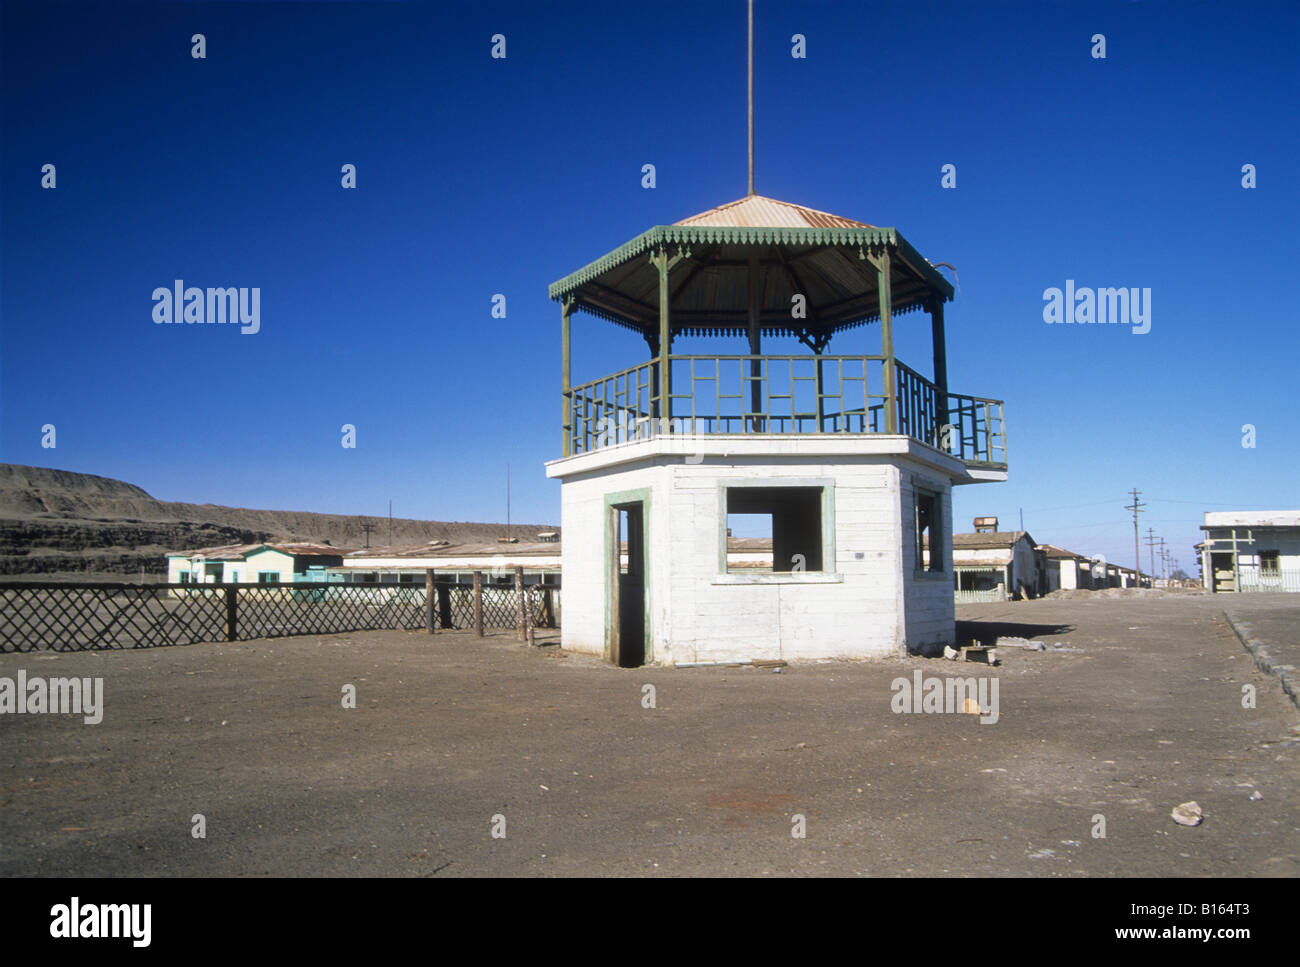 Bandstand in main square of abandoned mining town of Humberstone, near Iquique, Chile Stock Photo